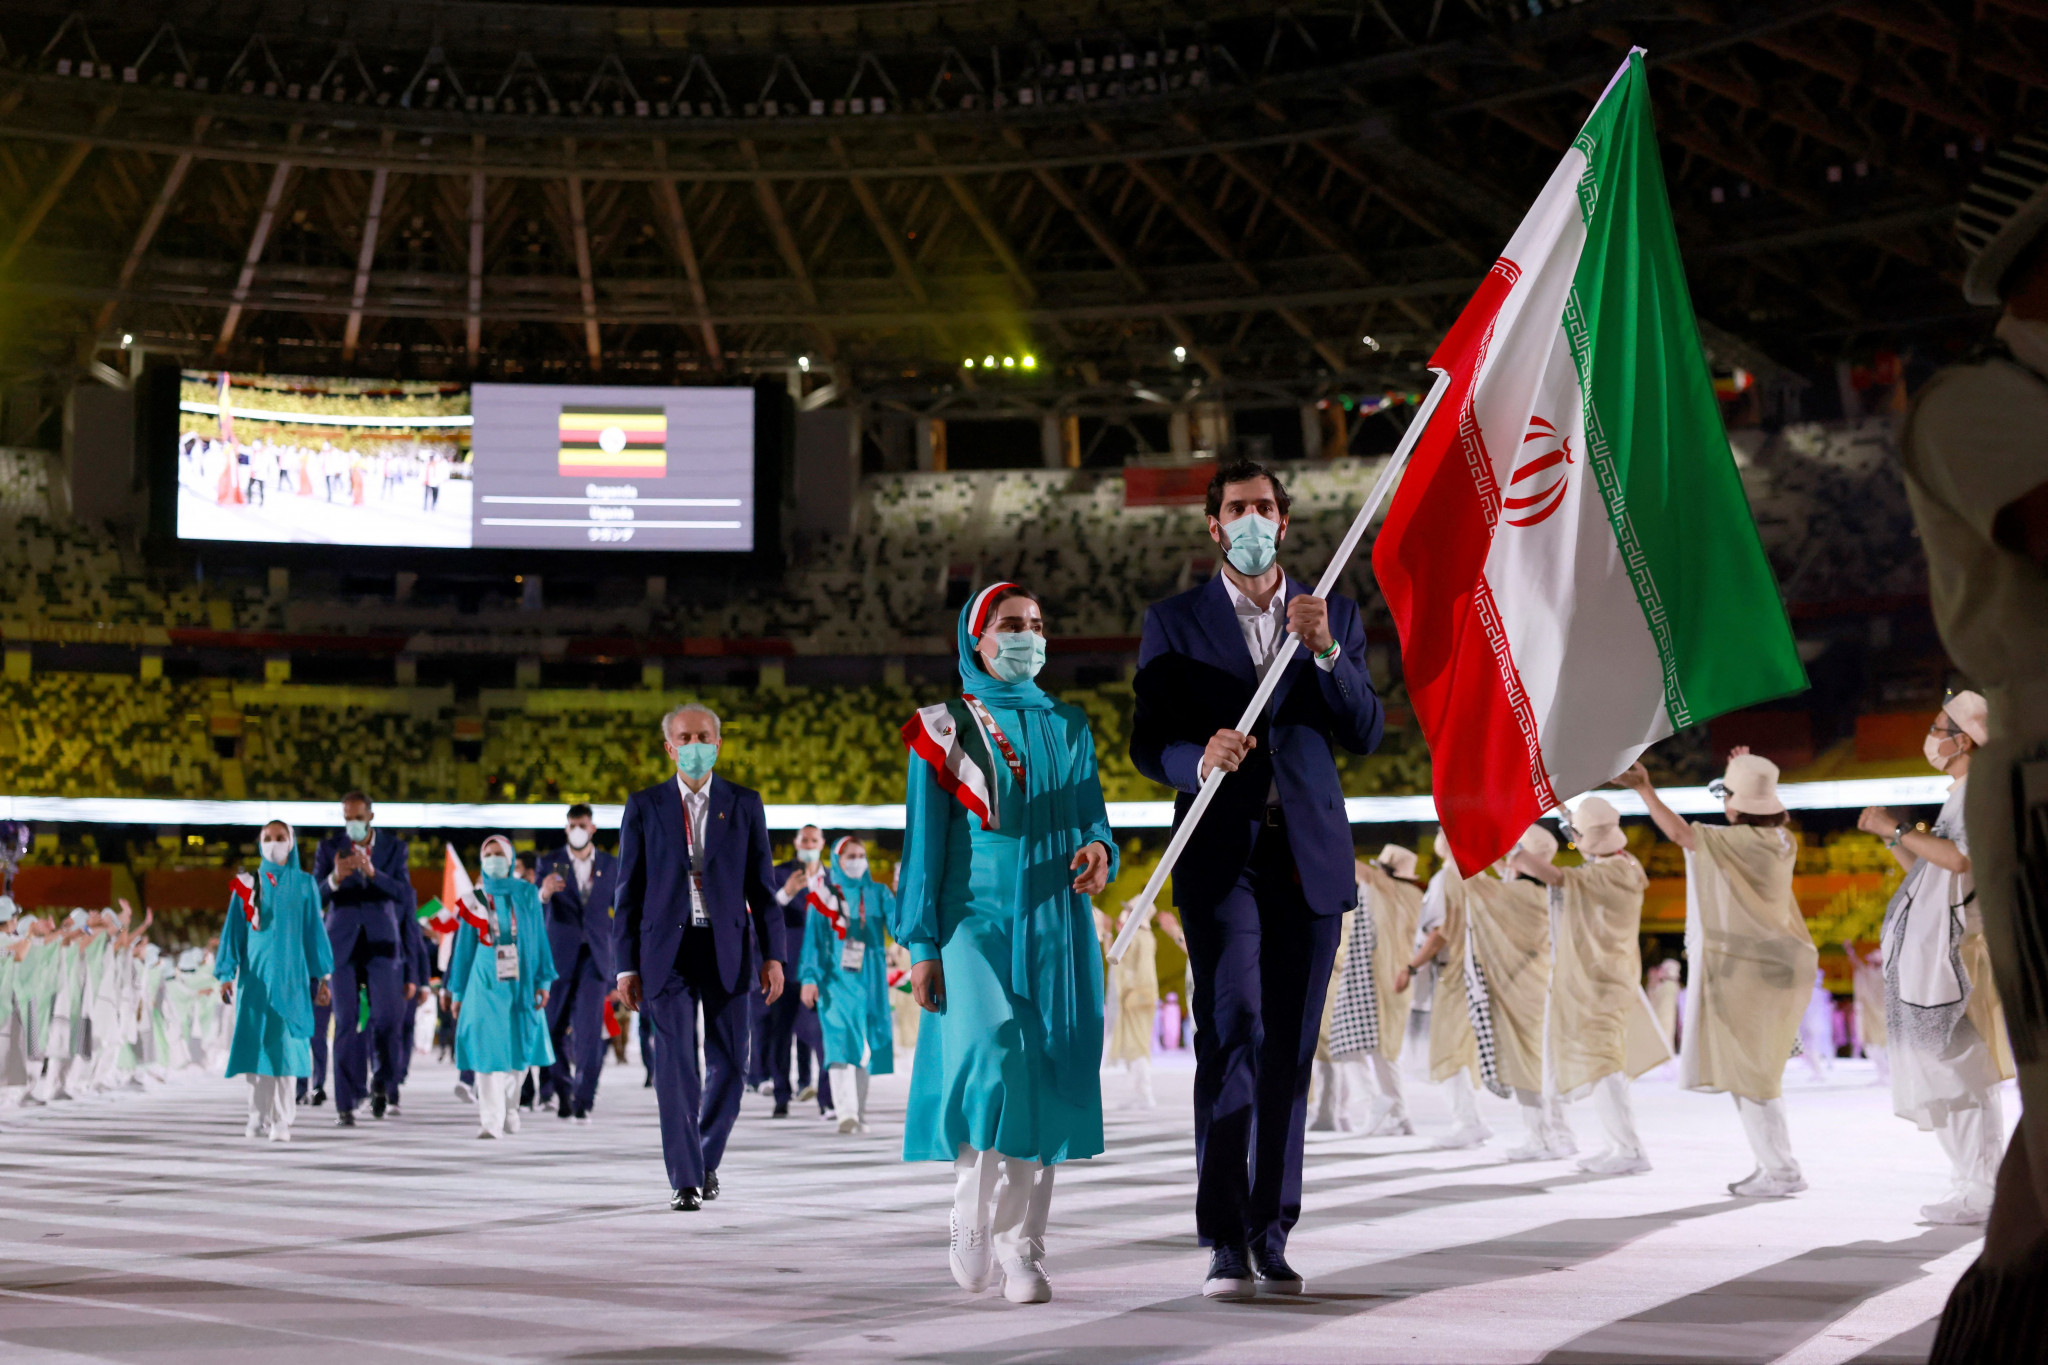 Iranian NOC summoned to Lausanne to receive warning from IOC over athlete welfare concerns and discrimination